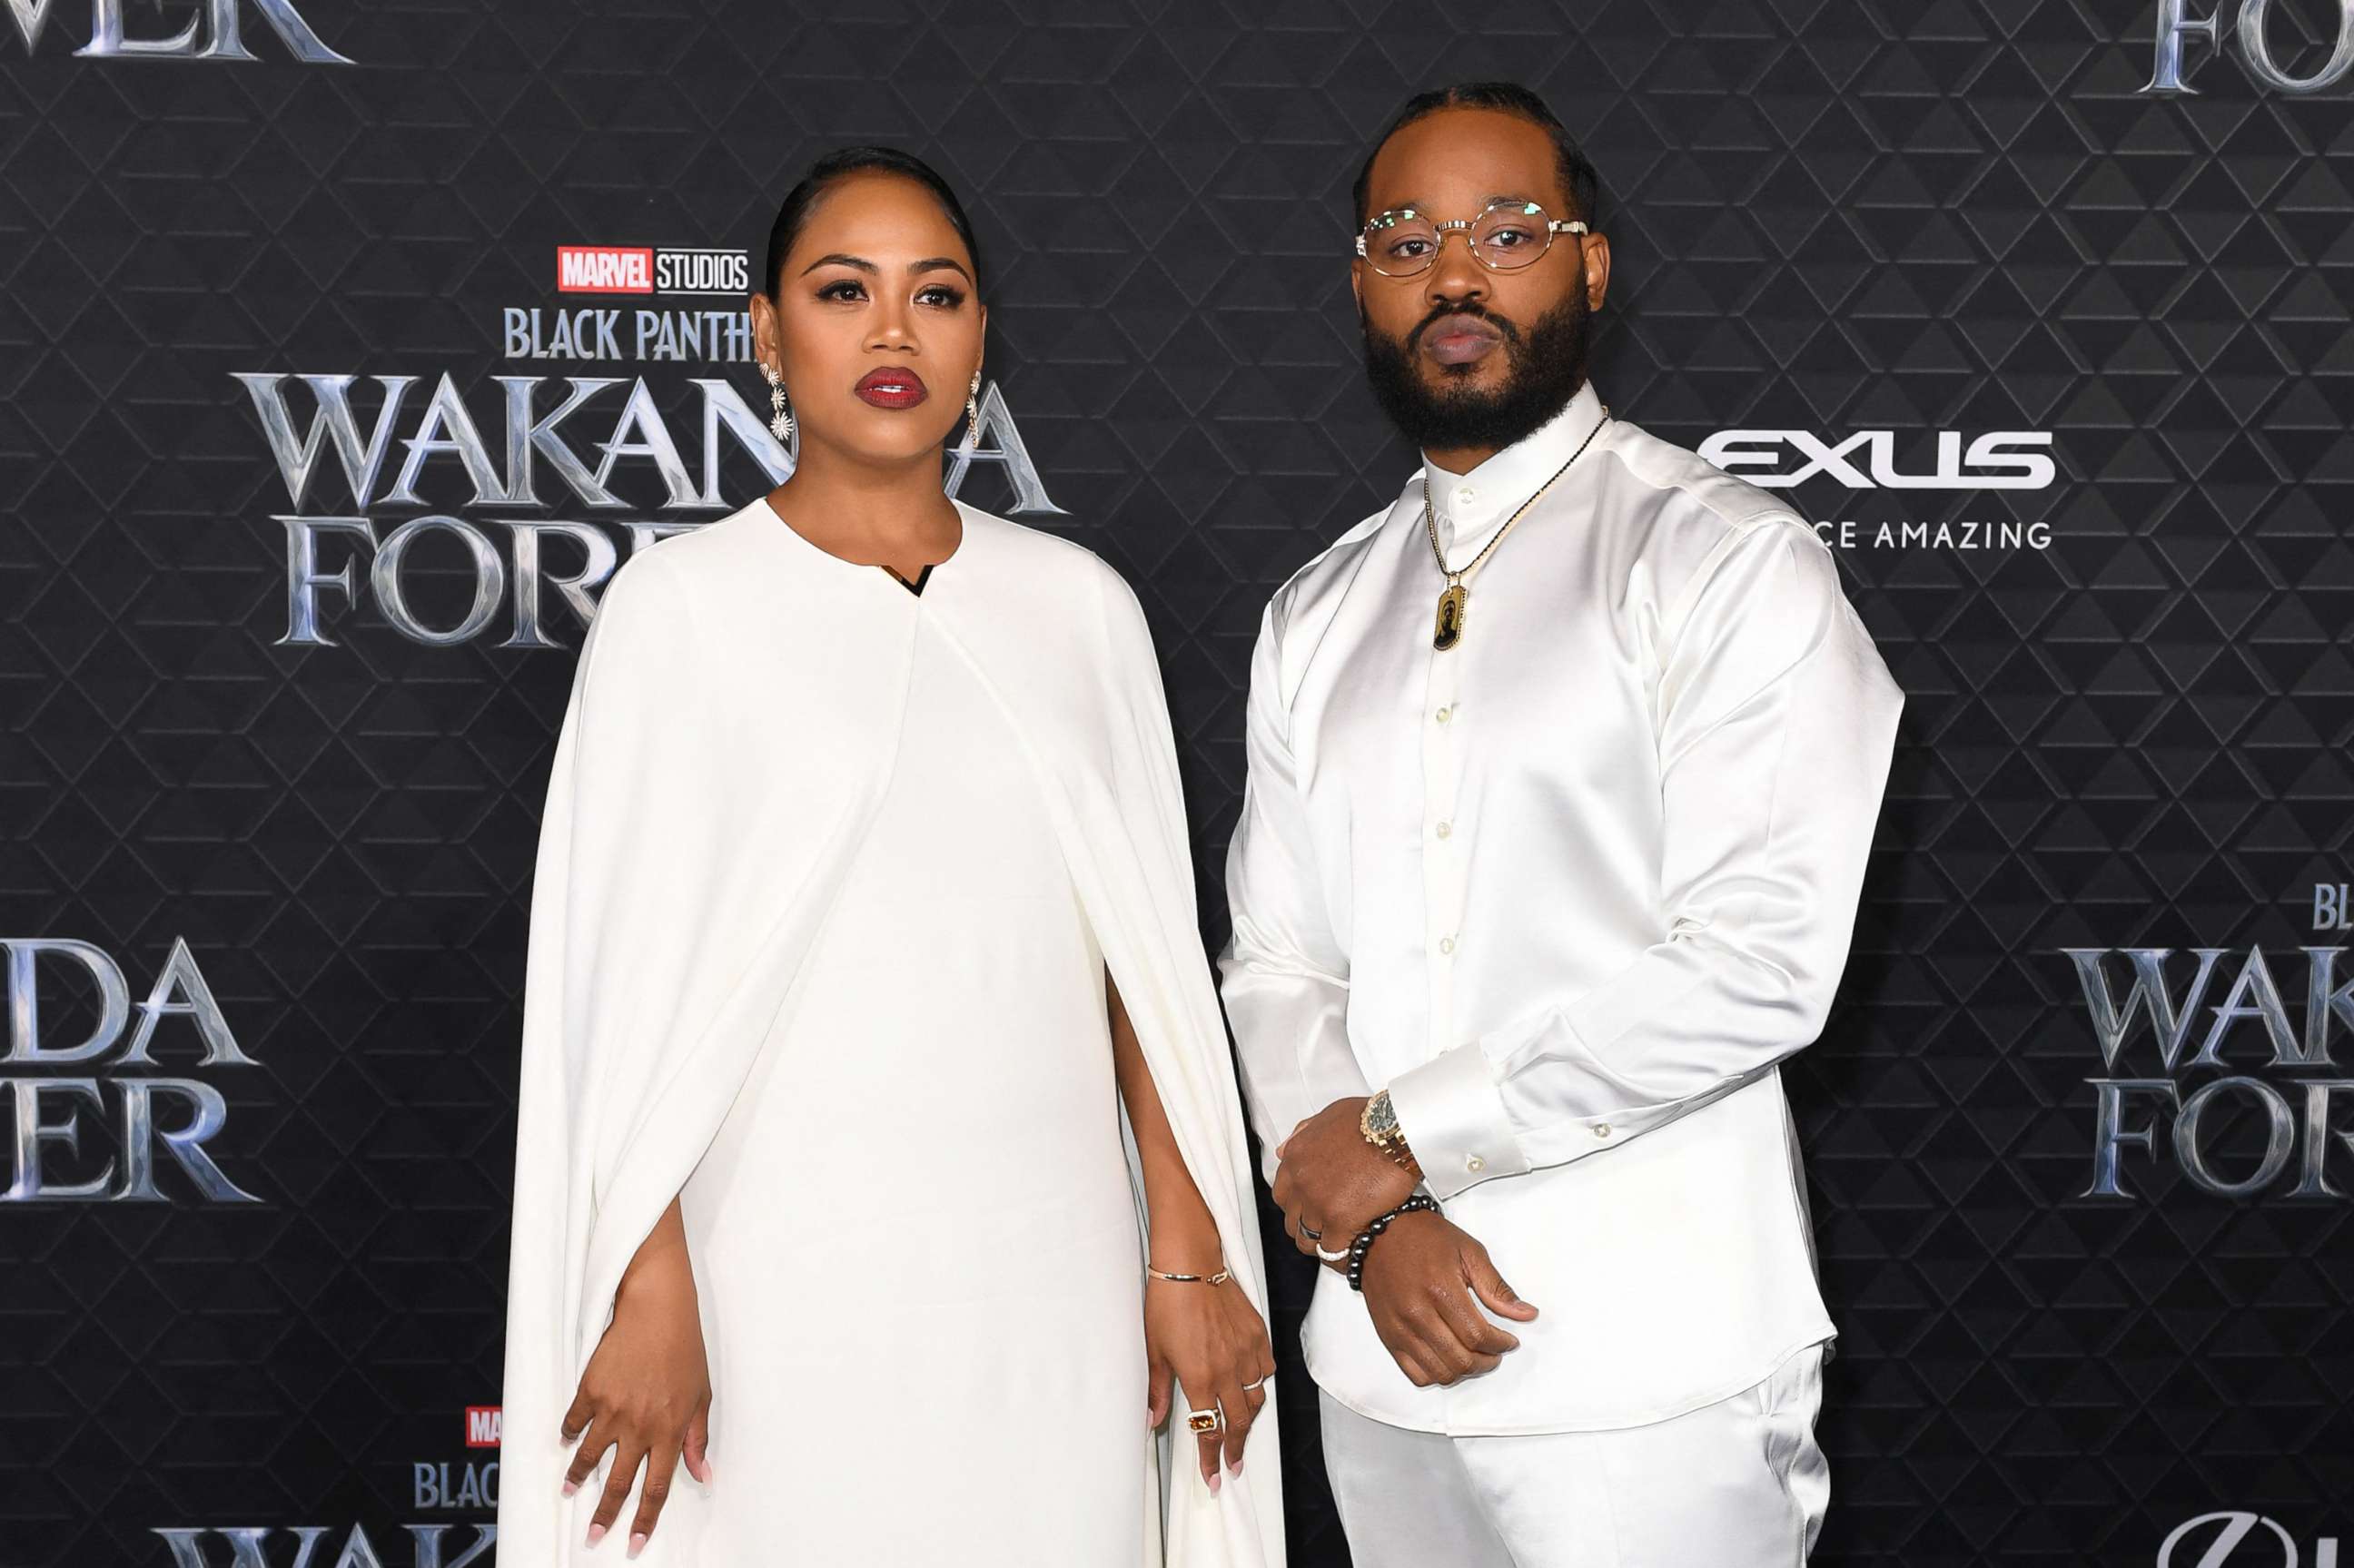 PHOTO: Director Ryan Coogler, right, arrives for the world premiere of Marvel Studios' "Black Panther: Wakanda Forever" at the Dolby Theatre in Hollywood, Calif., on Oct. 26, 2022.